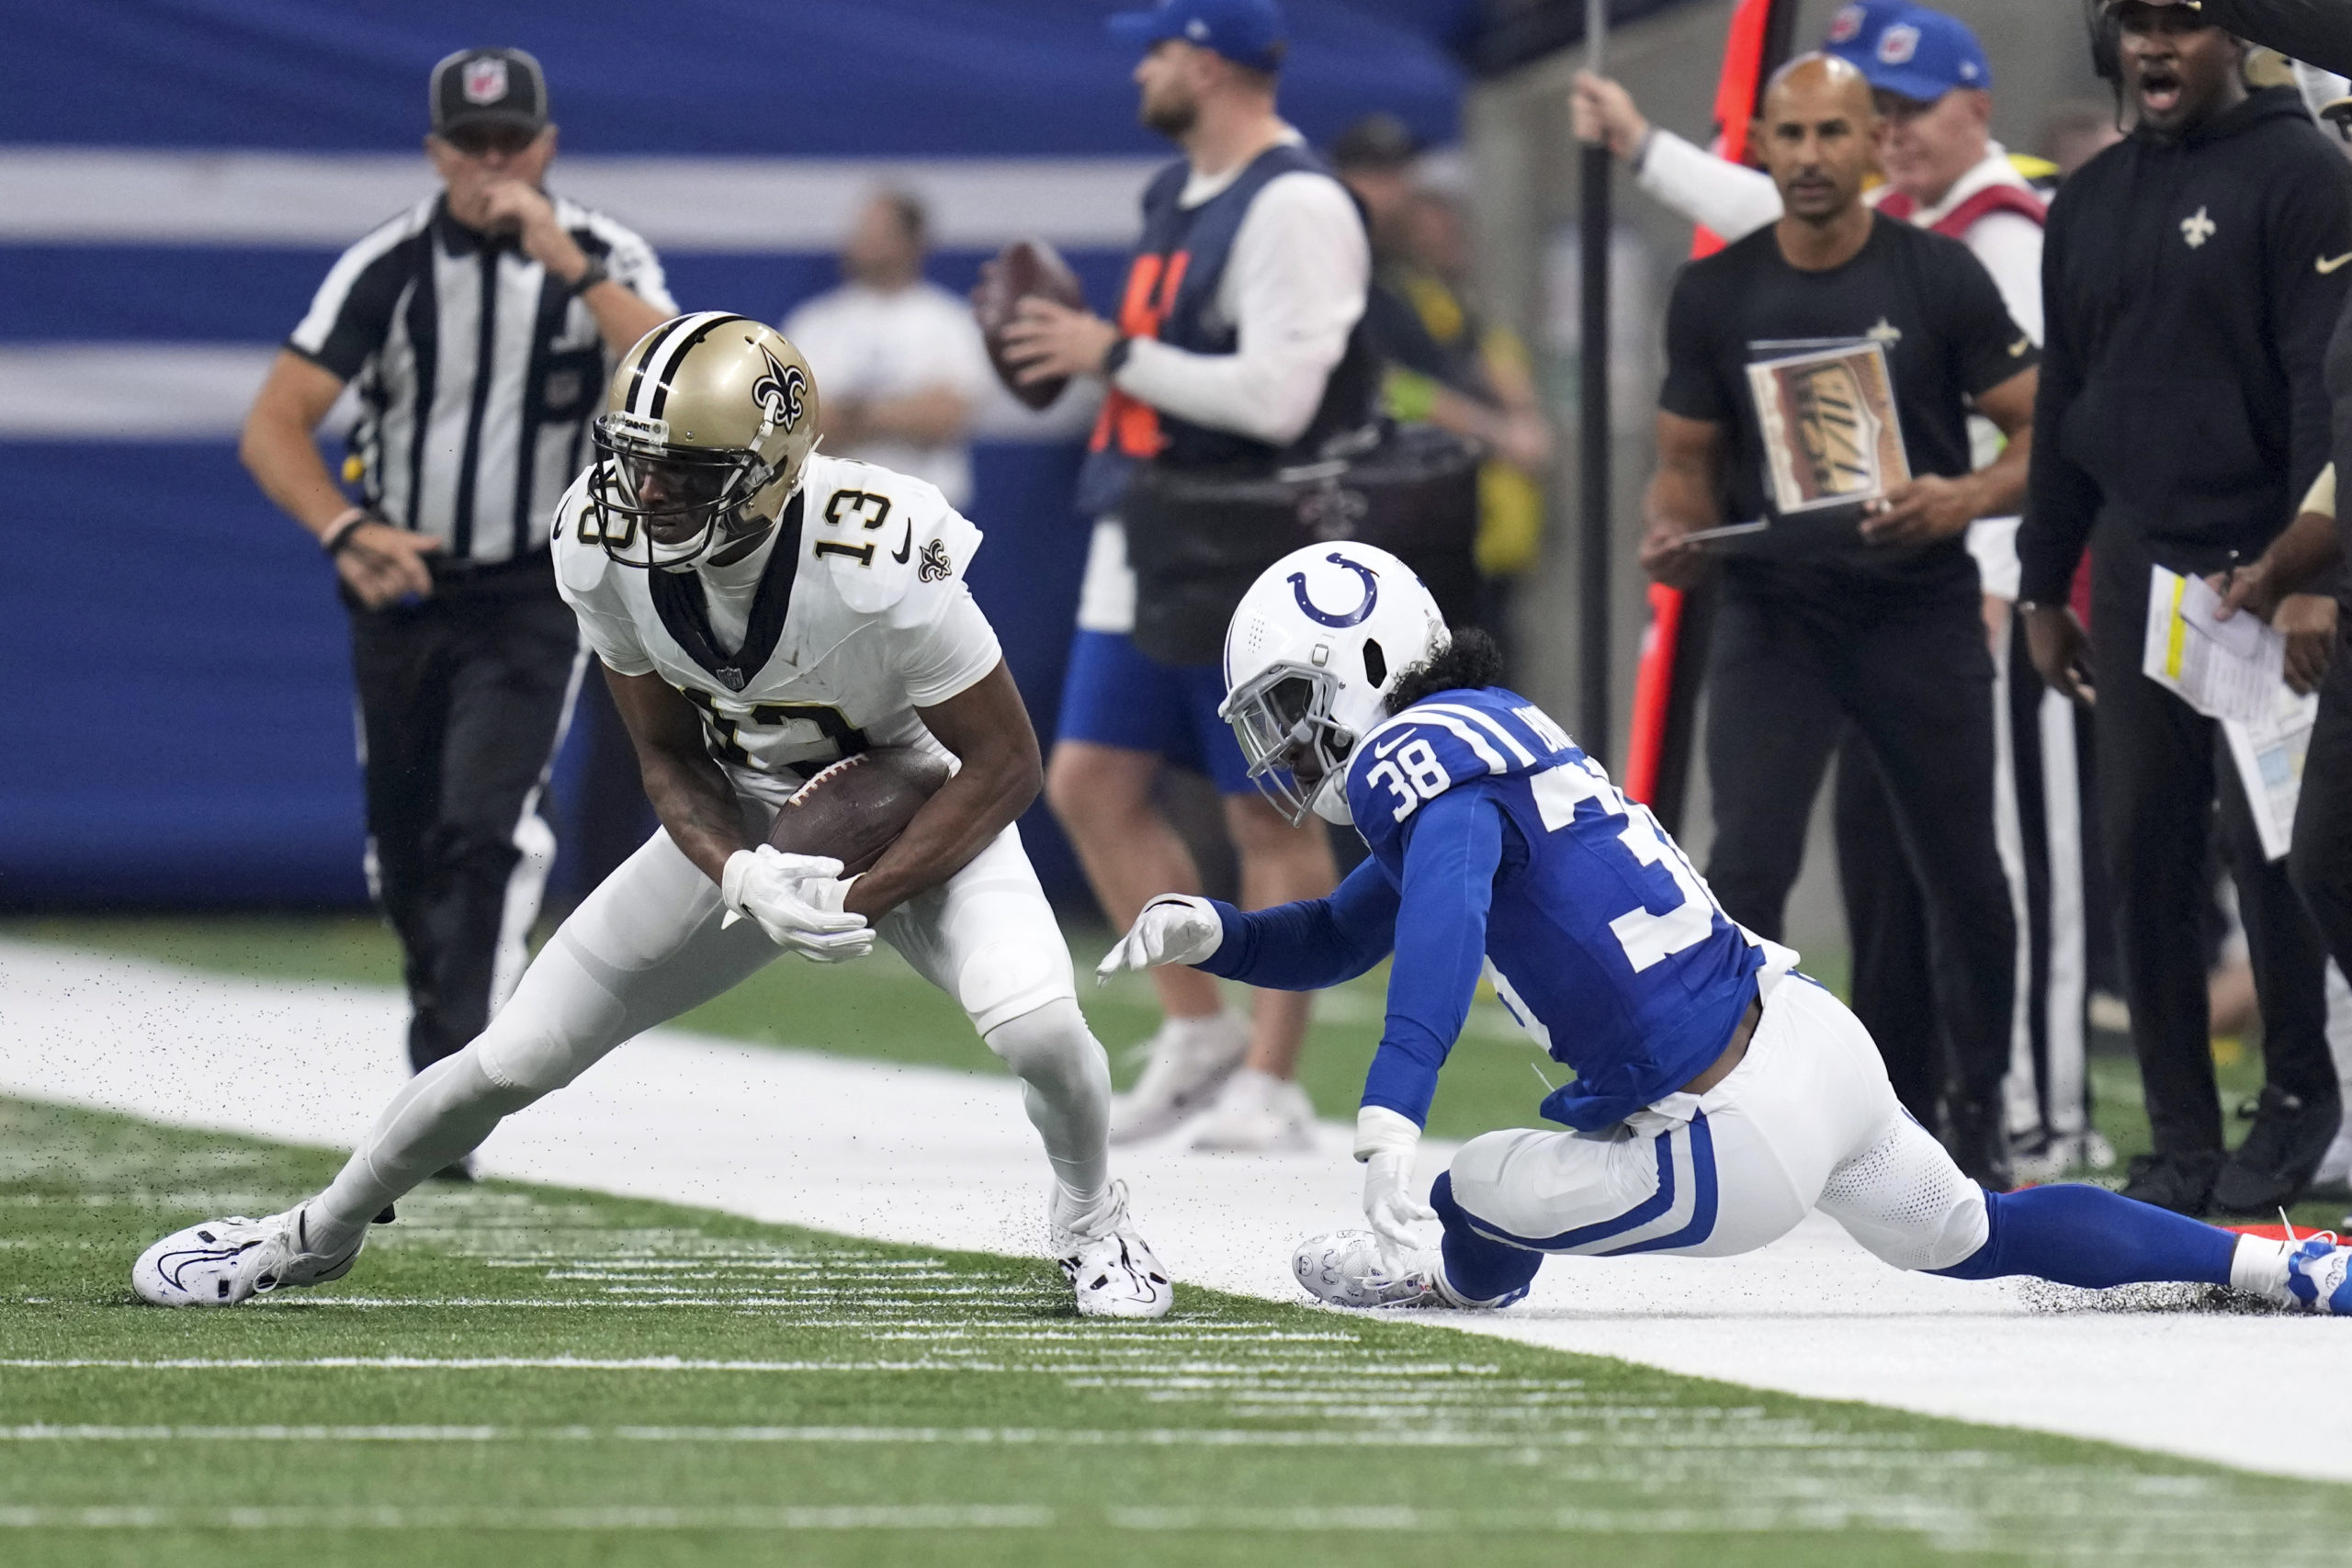 New Orleans Saints wide receiver Michael Thomas (13) sheds the tackle of Colts cornerback Tony Brown during the first half of an NFL game Oct. 29 in Indianapolis.